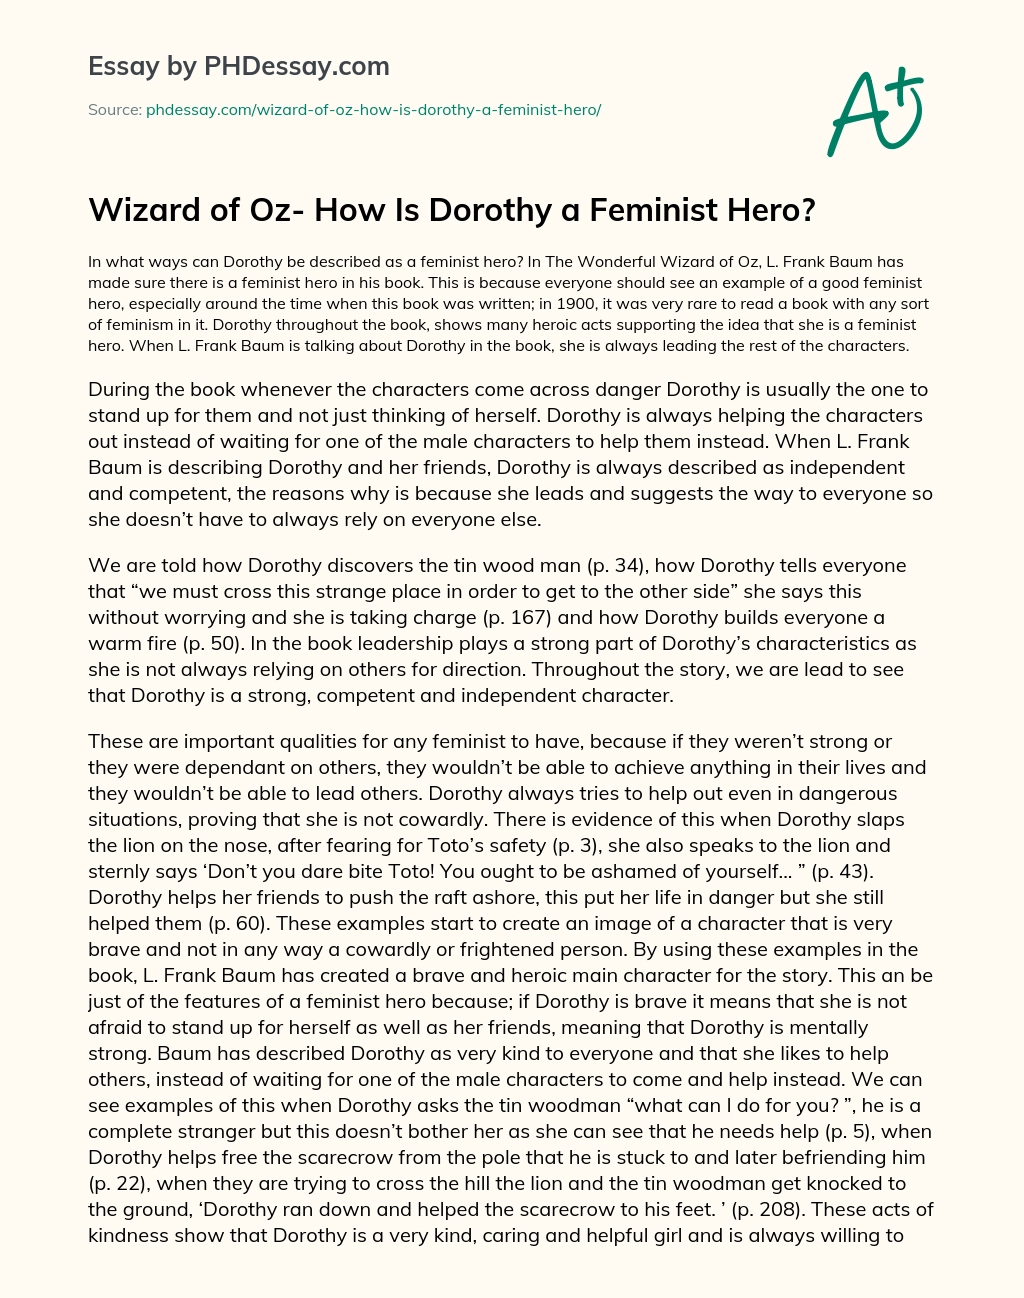 Wizard of Oz- How Is Dorothy a Feminist Hero? essay